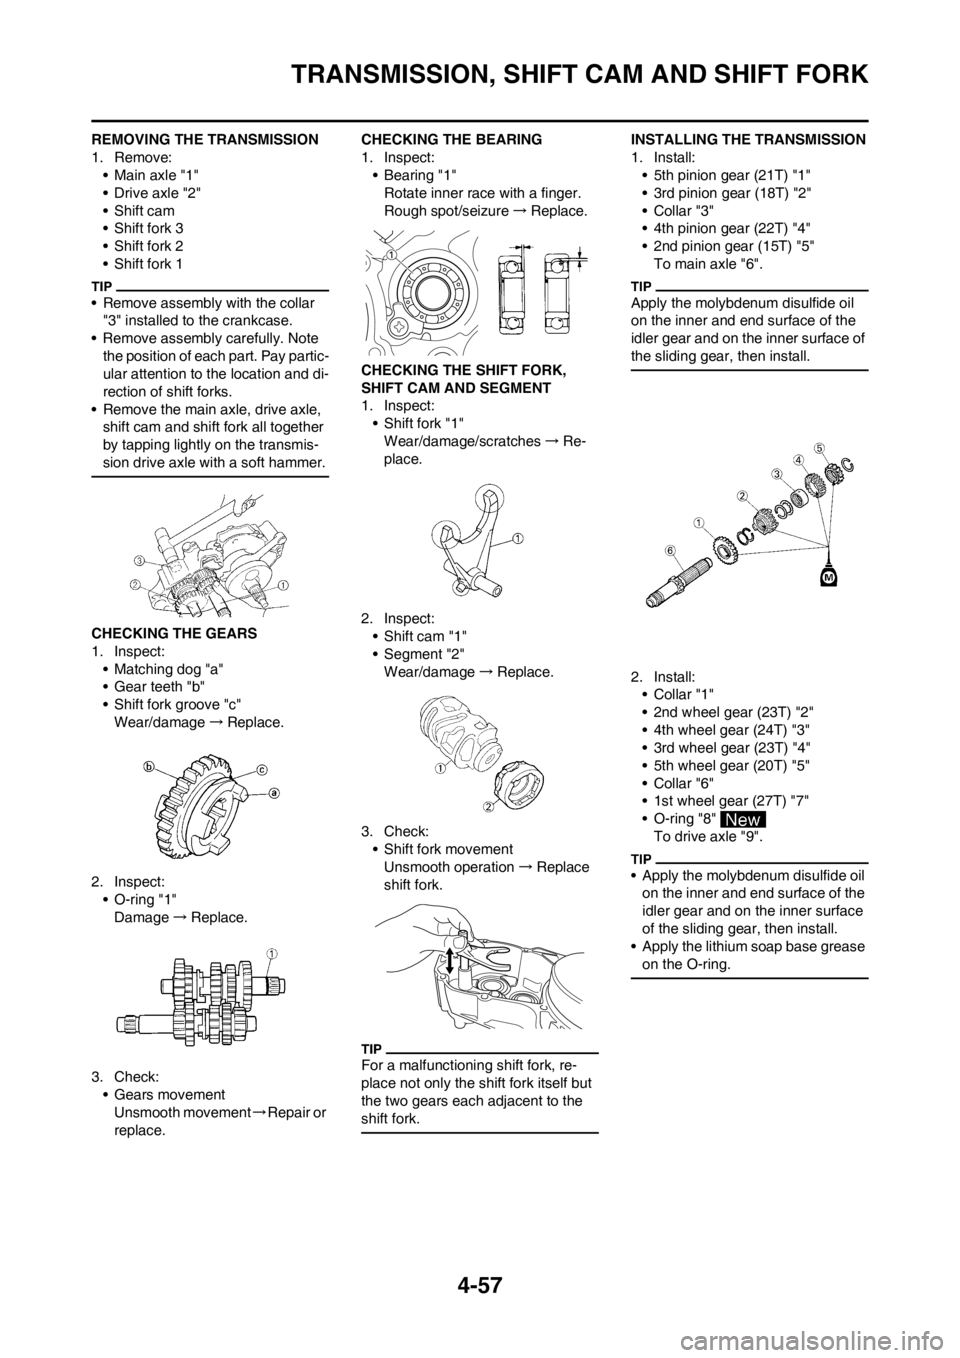 YAMAHA YZ450F 2013  Owners Manual 4-57
TRANSMISSION, SHIFT CAM AND SHIFT FORK
REMOVING THE TRANSMISSION
1. Remove:
• Main axle "1"
• Drive axle "2"
• Shift cam
• Shift fork 3
• Shift fork 2
• Shift fork 1
• Remove assemb